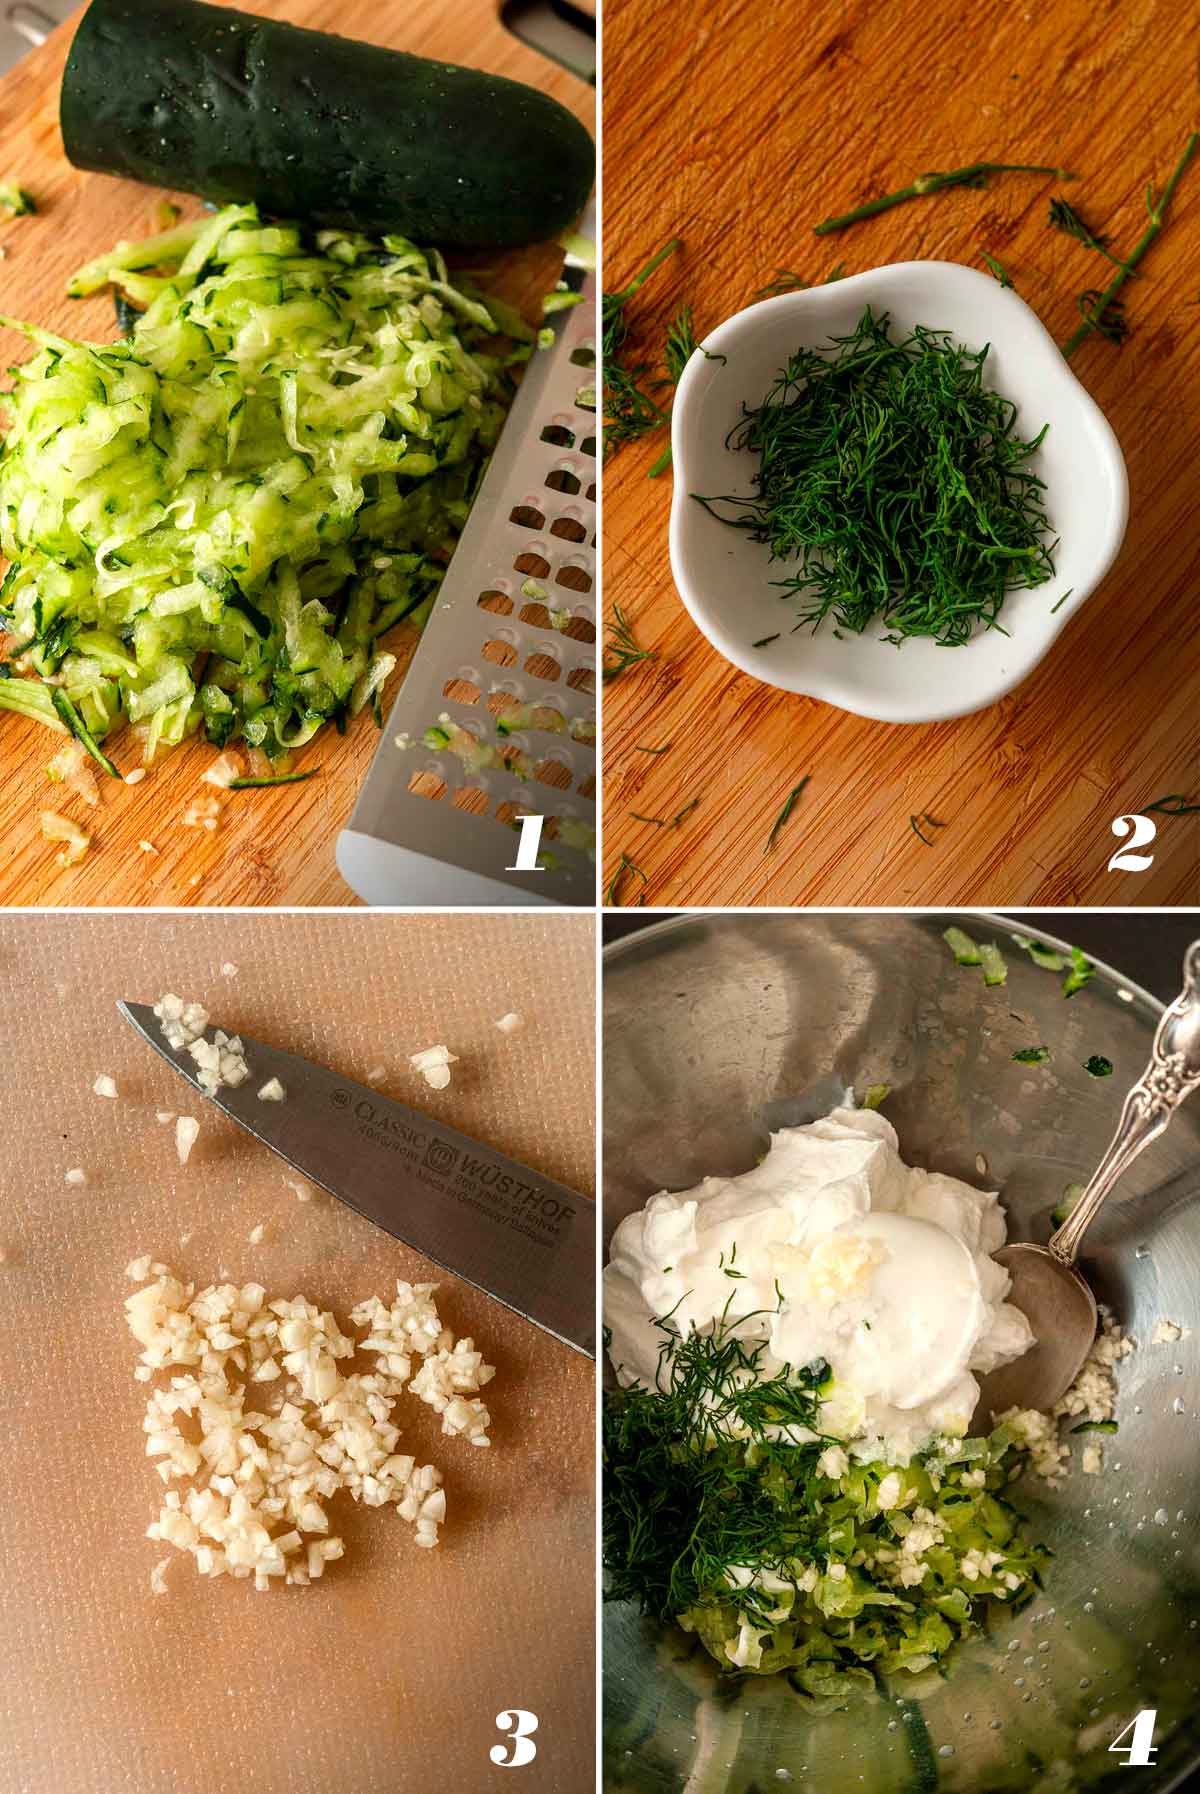 A collage of 4 numbered images showing how to make tzatziki.